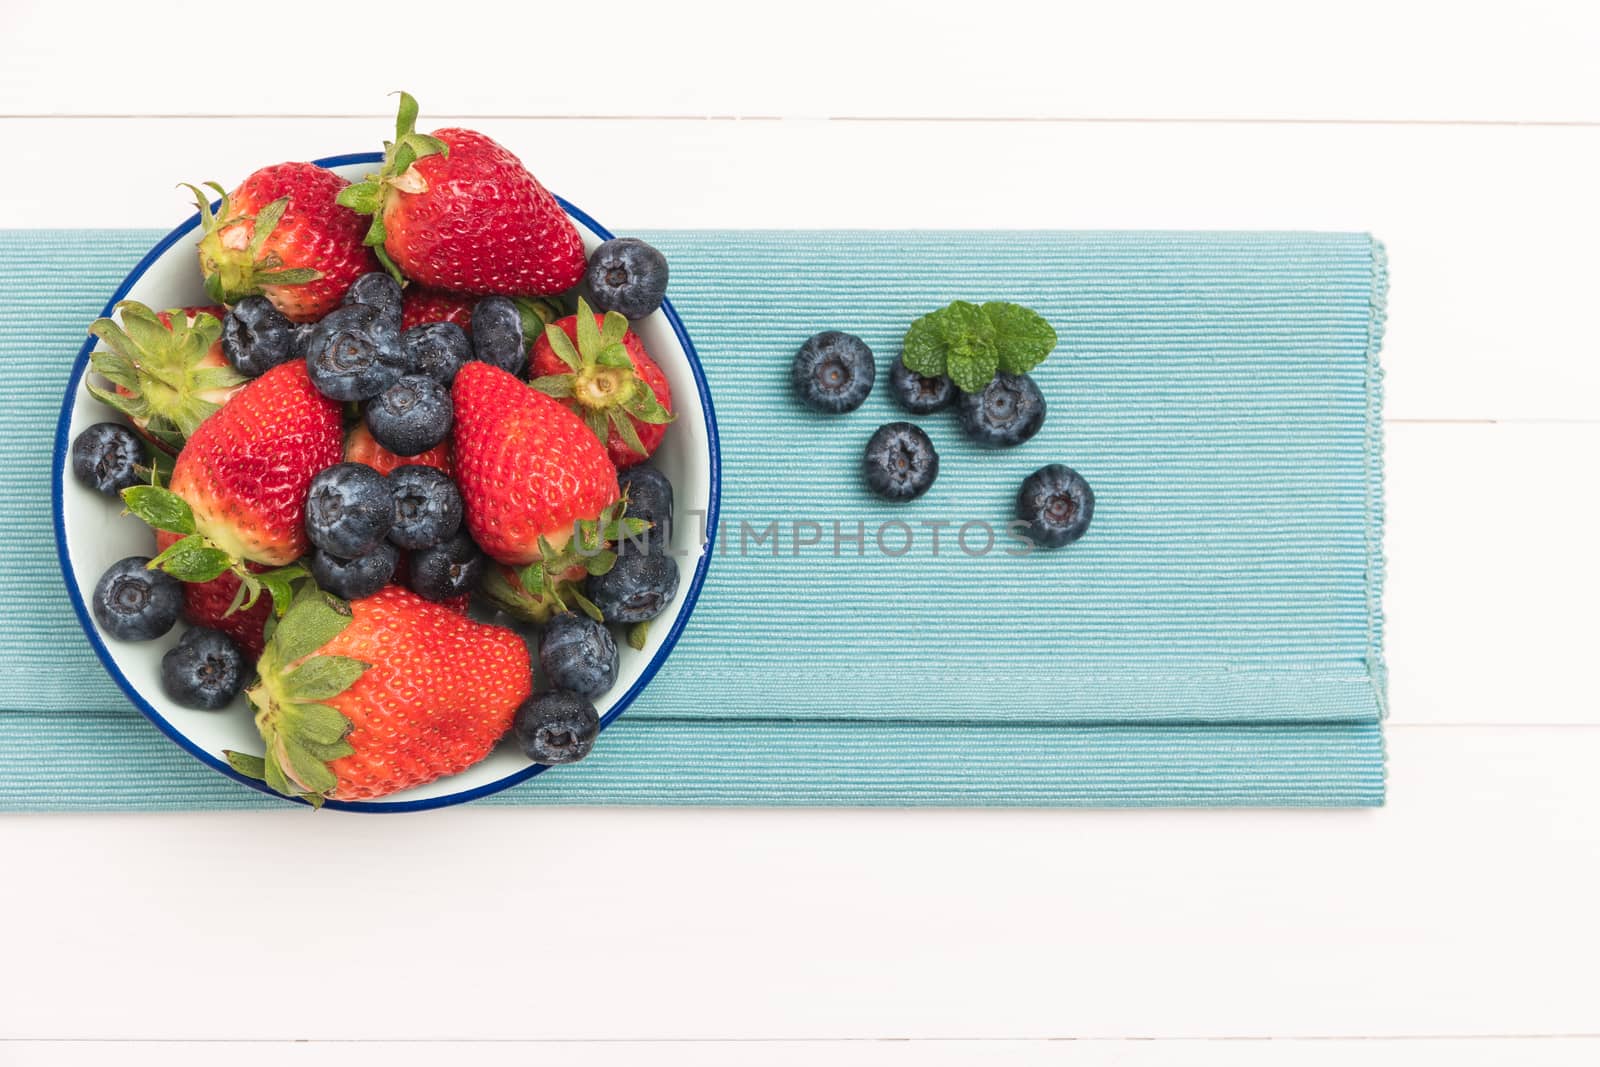 Ceramic bowl with blueberries and strawberries at blue textile napkin over wooden table. Top view with copy space